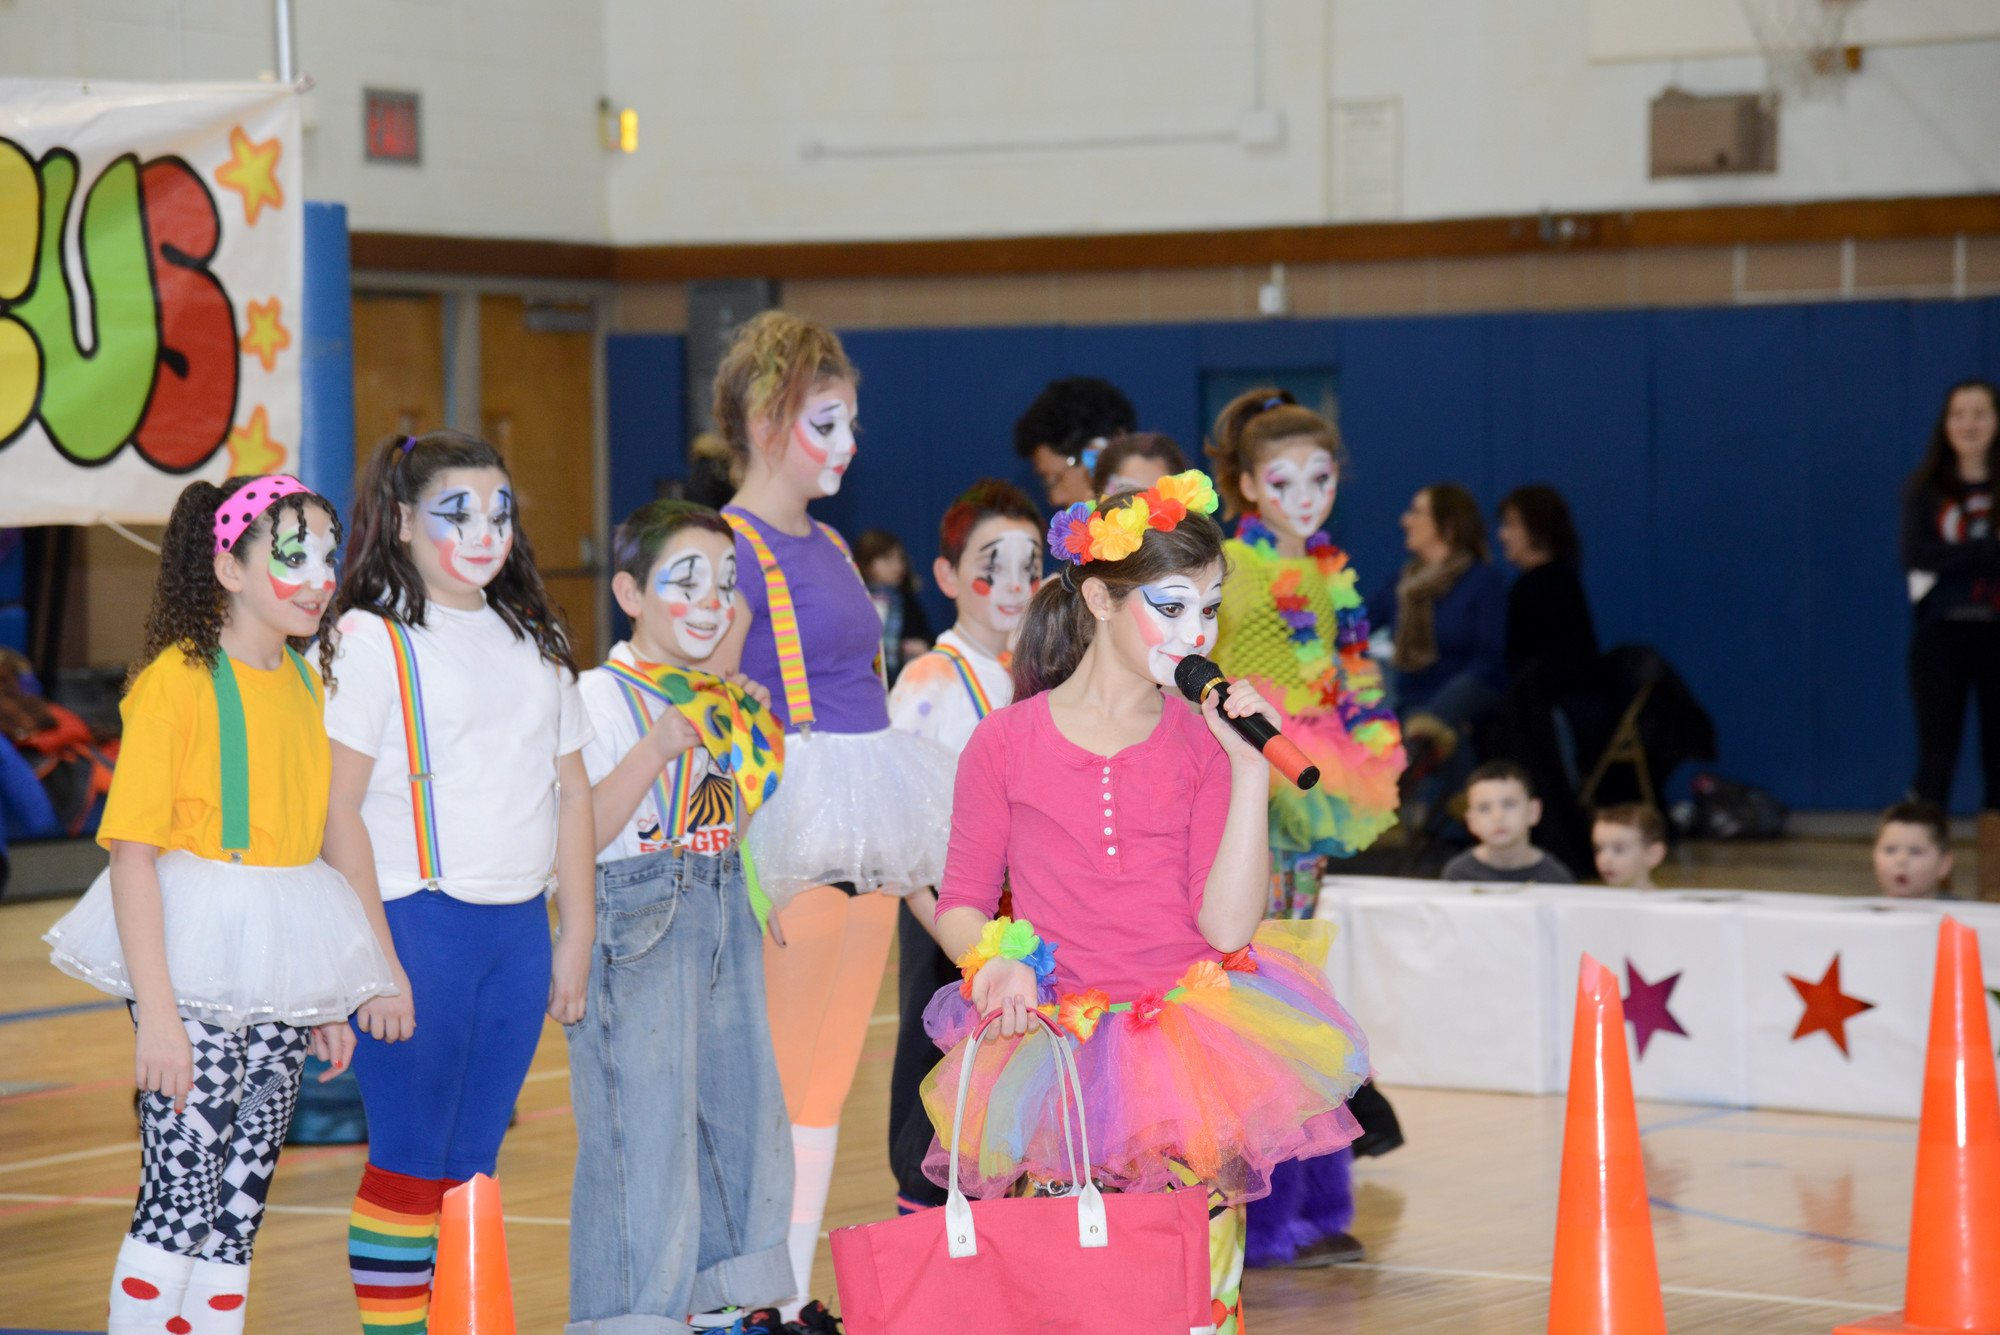 Emily Esposito, Ariel Lari, Ryan Collins, Caroline Bittle, Kevin Collins, Kennedy Ramos and Danna Brintouch, in front, clowned around.